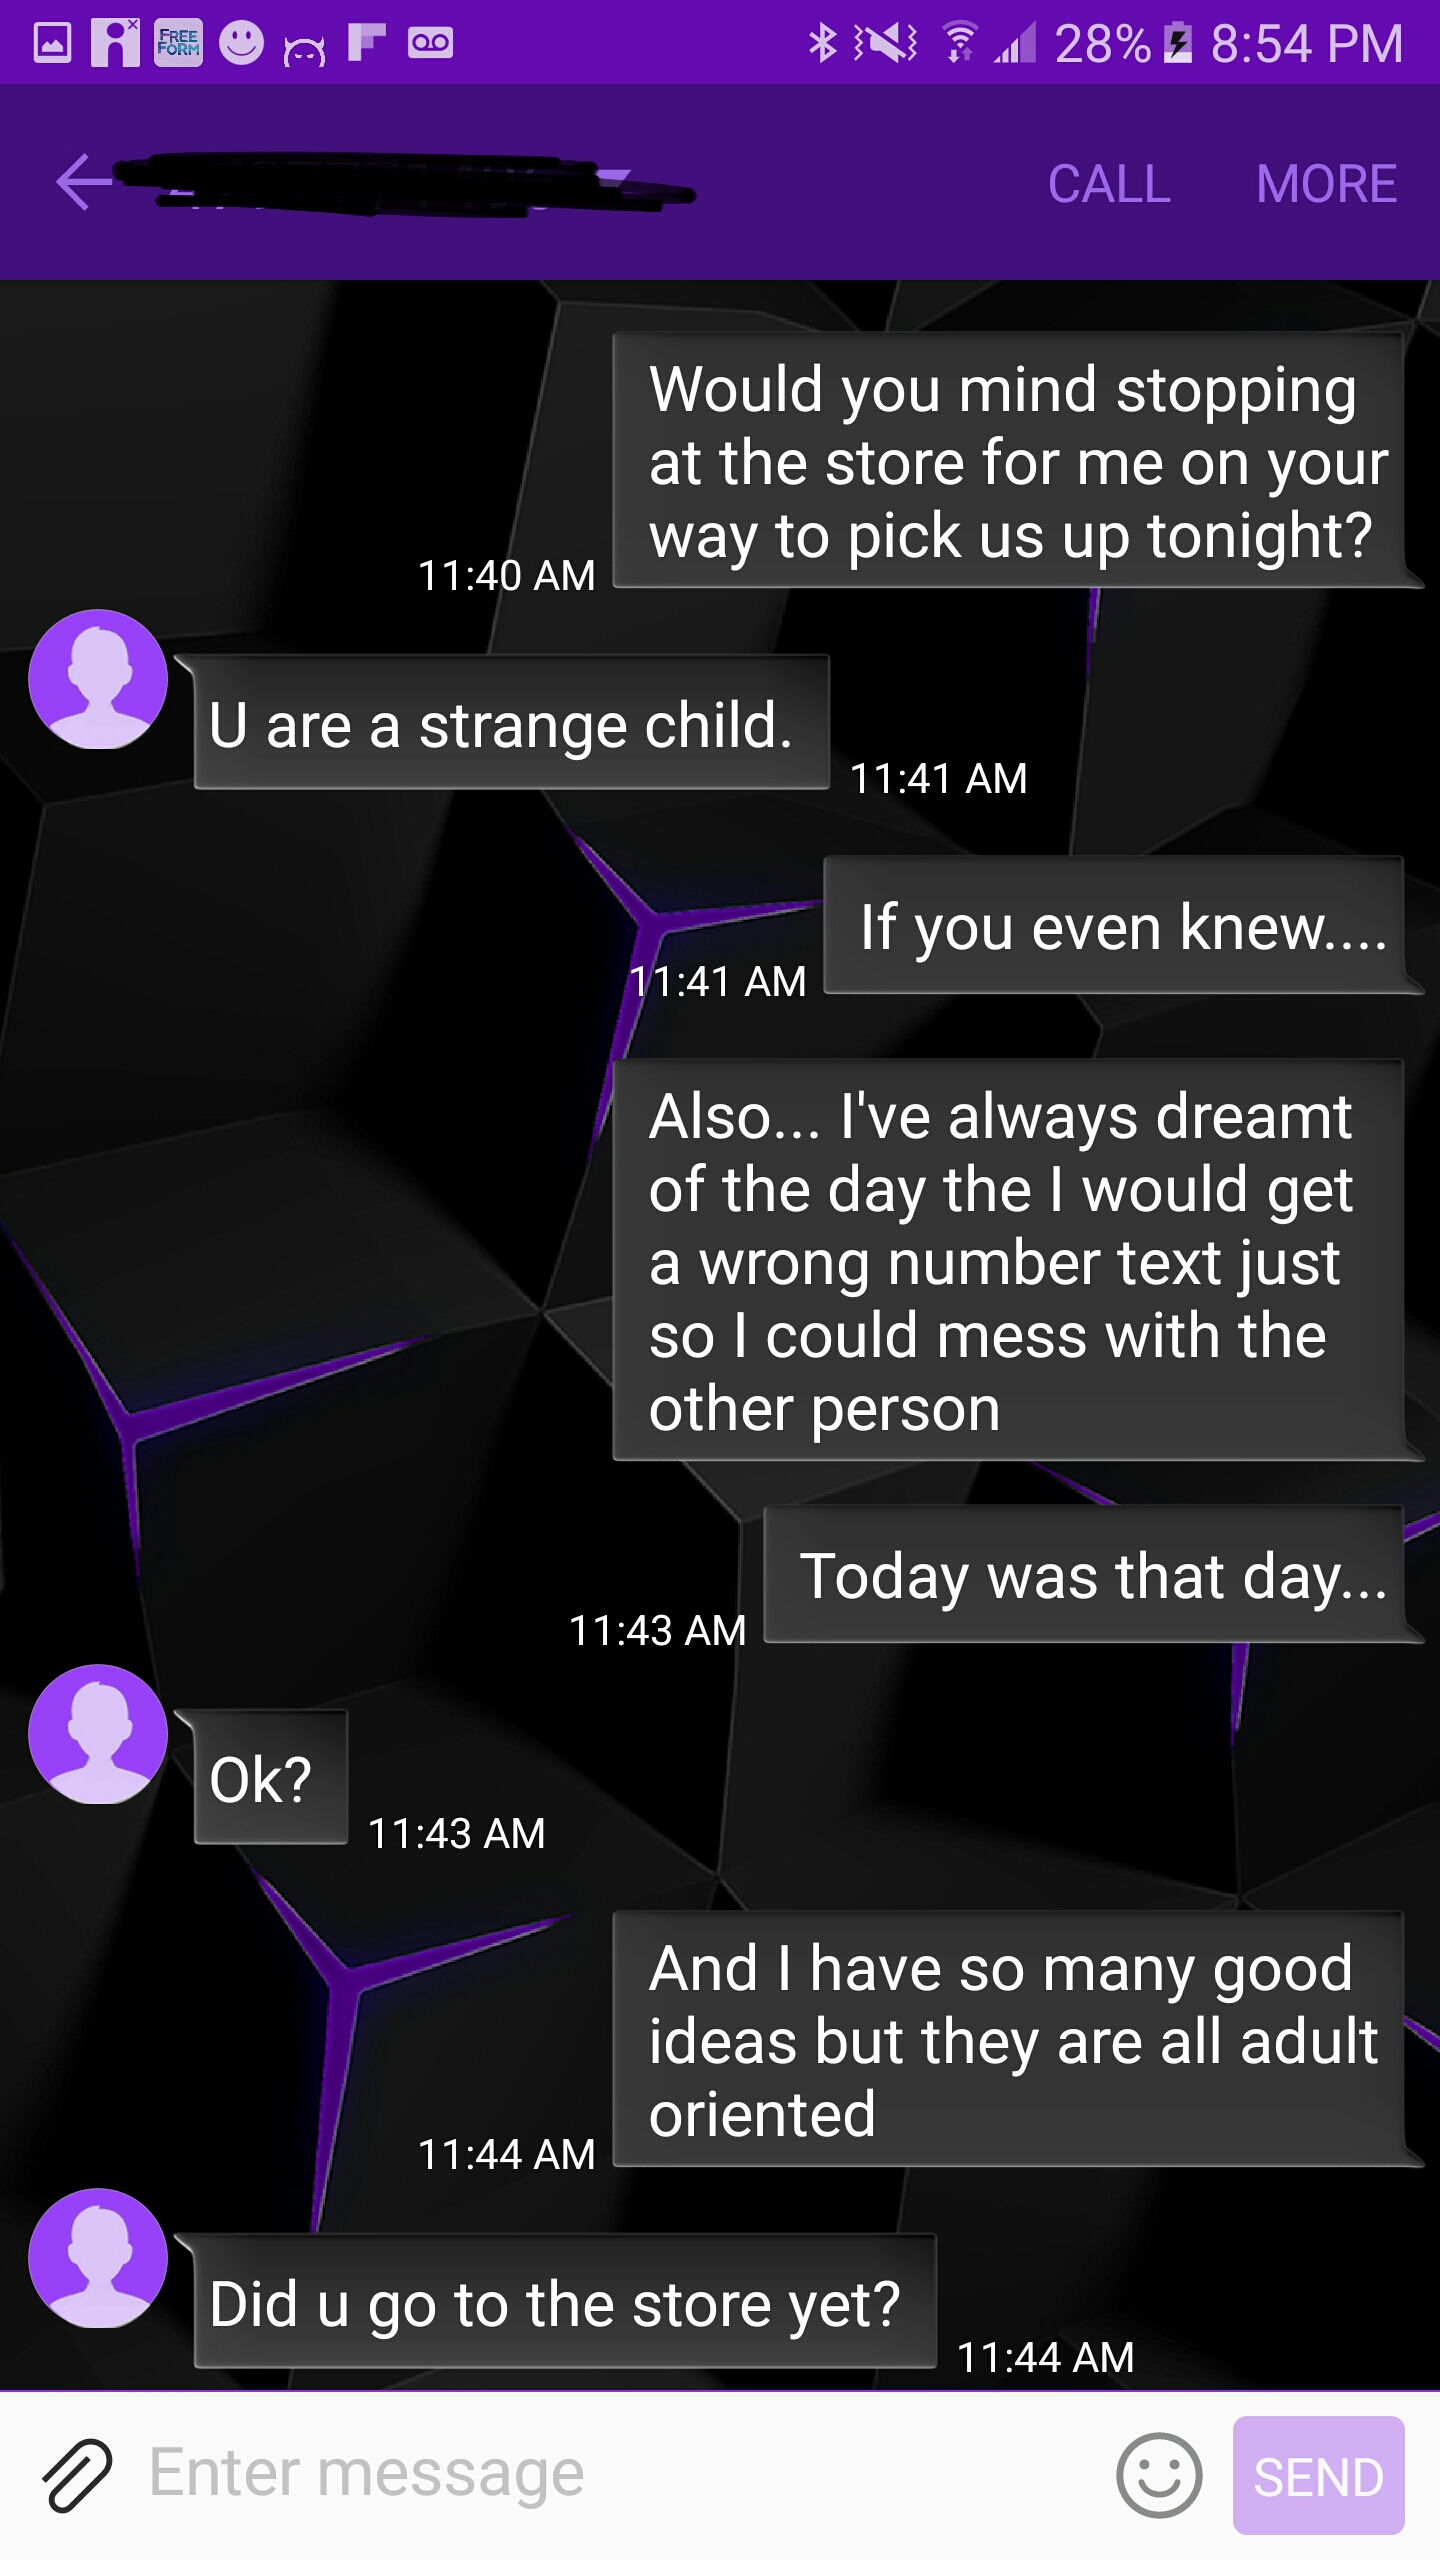 When Texting A Wrong Number Goes... In A Full Cringe Mode